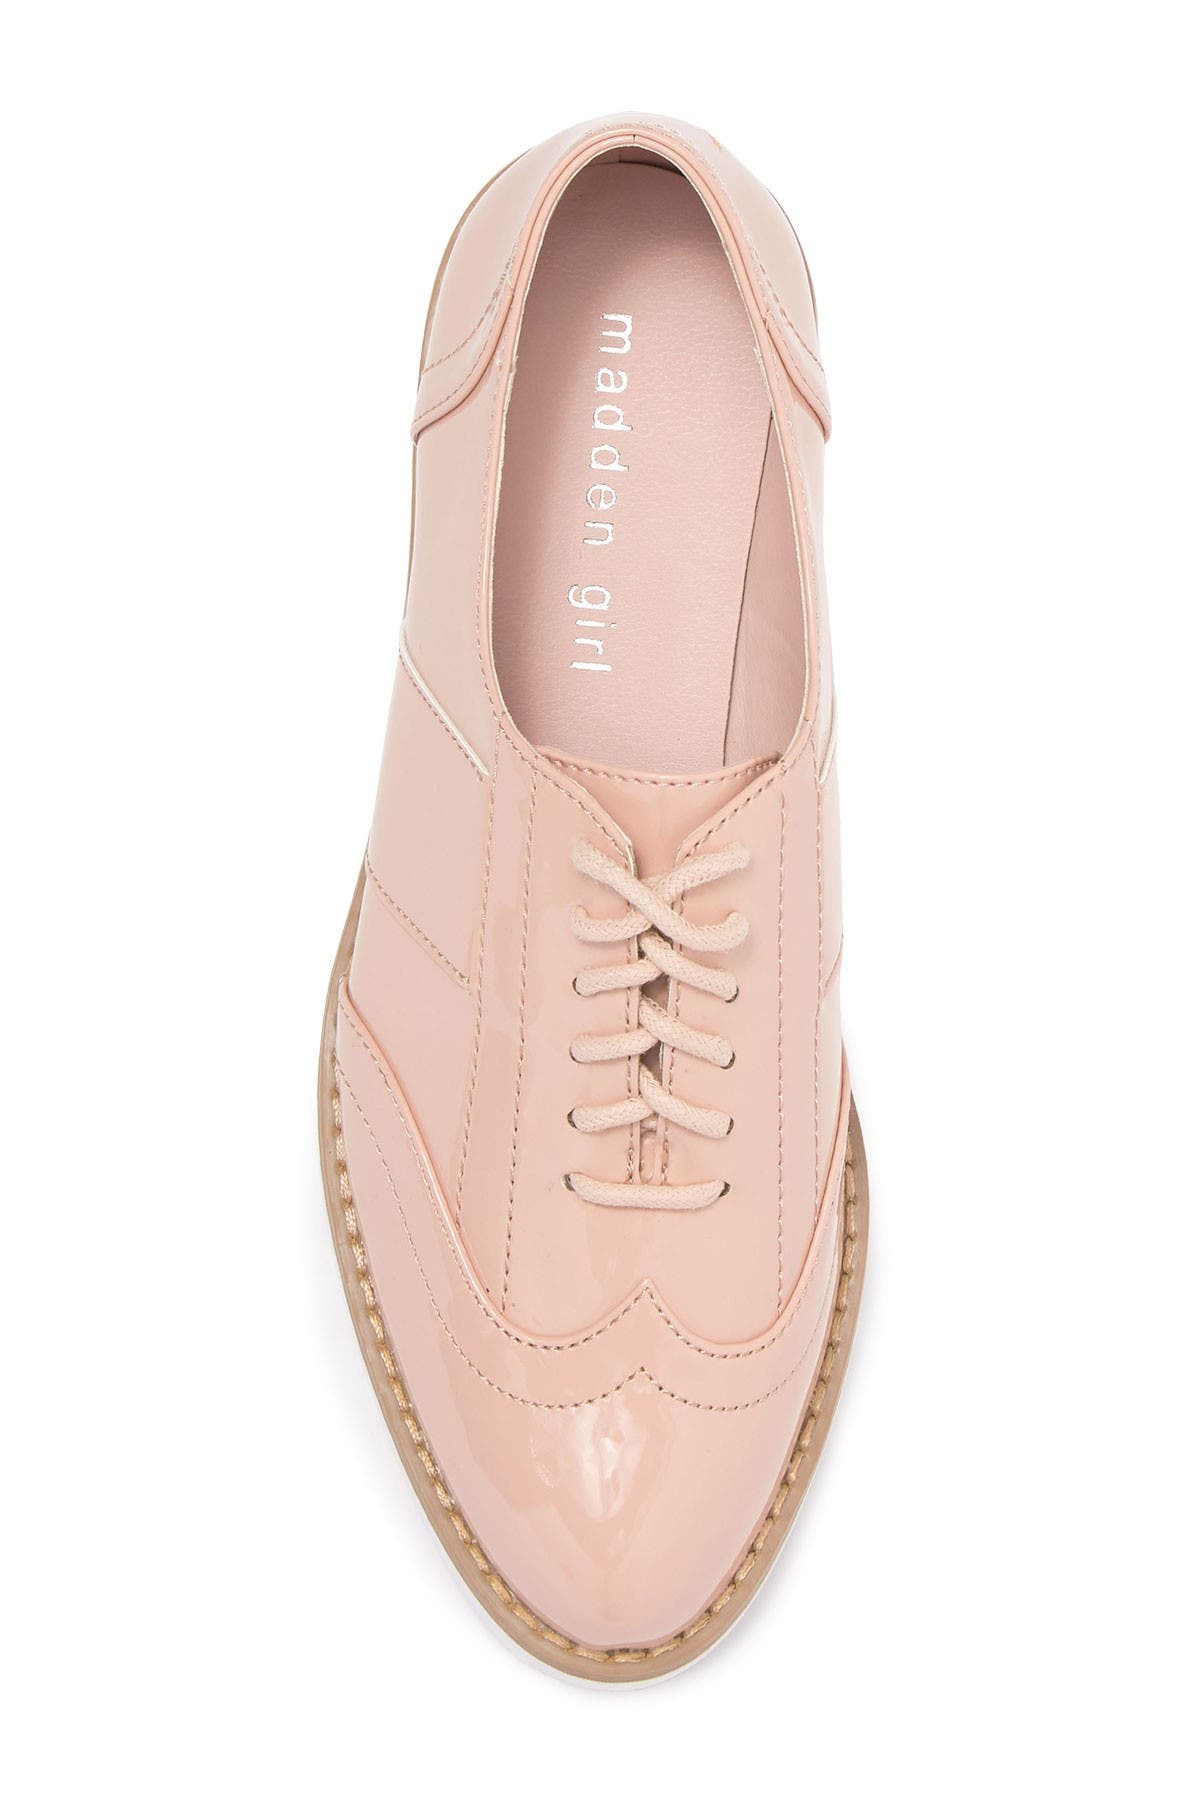 madden girl oxford shoes